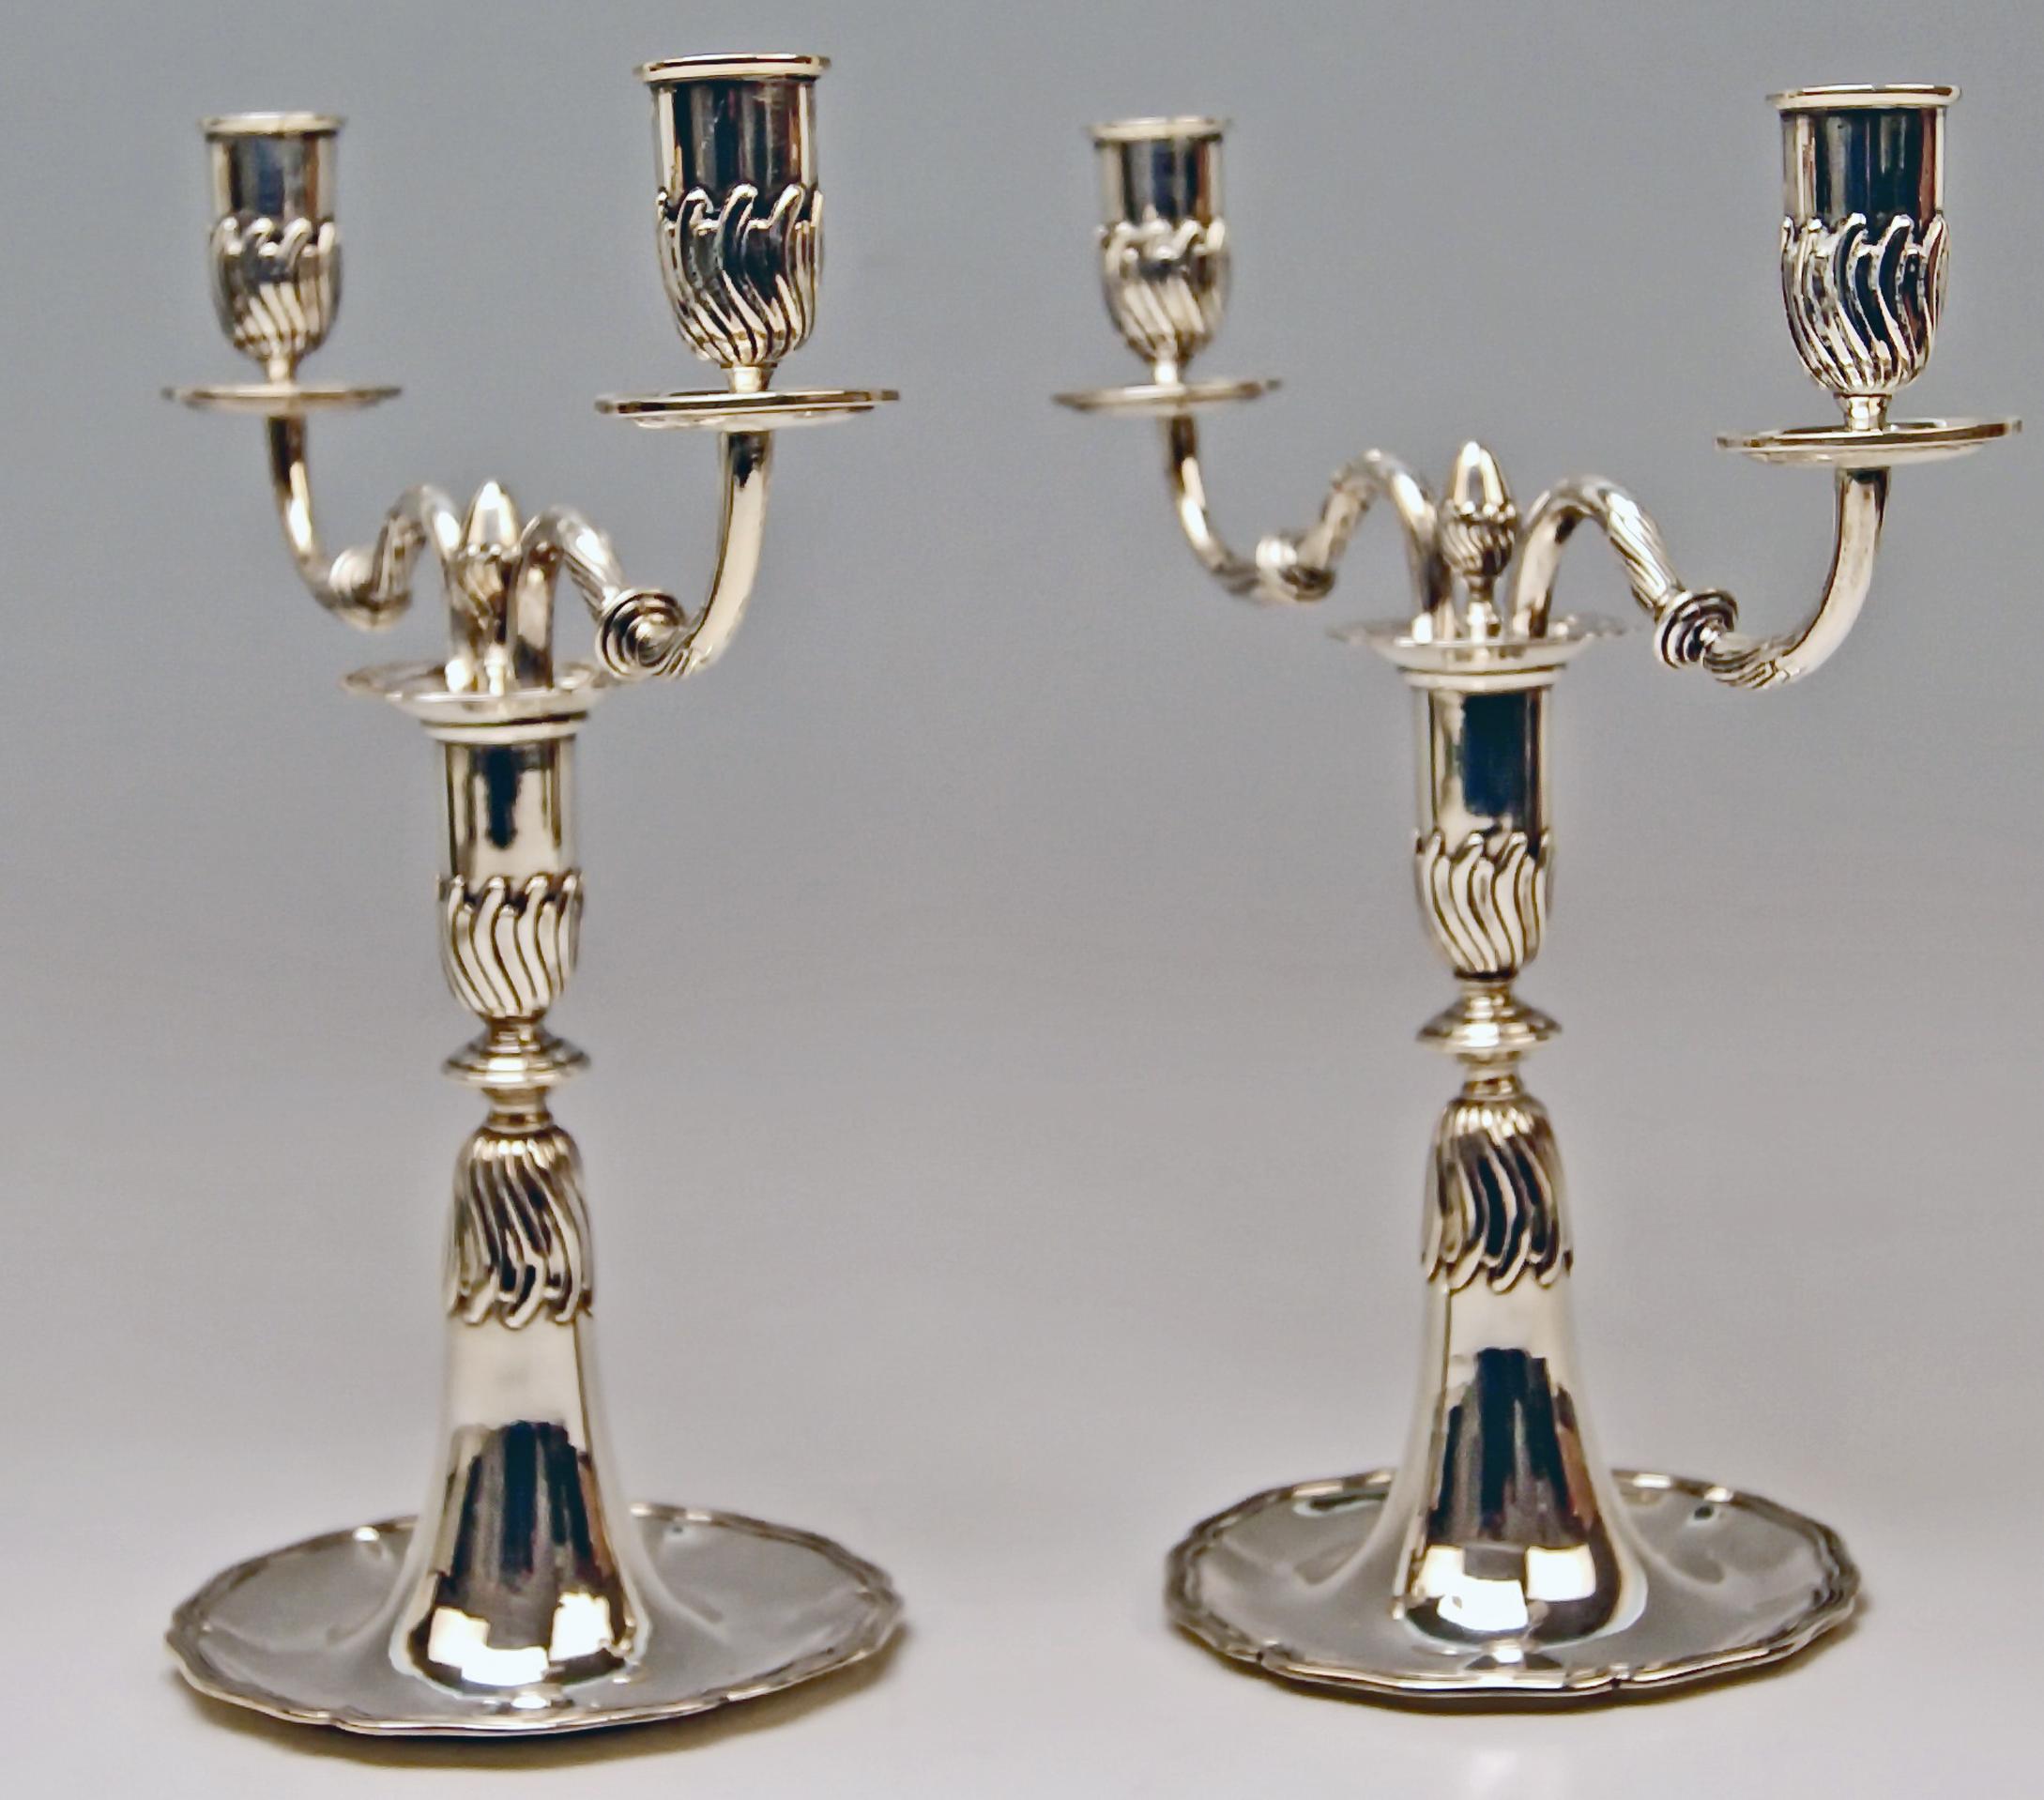 Gorgeous Silver Pair of Nicest Candlesticks of finest manufacturing quality as well as of most elegant appearance. -  These candlesticks were made during HIGH VICTORIAN  PERIOD  (c.1875-80).

They are stunningly made in following manner:  Surface of